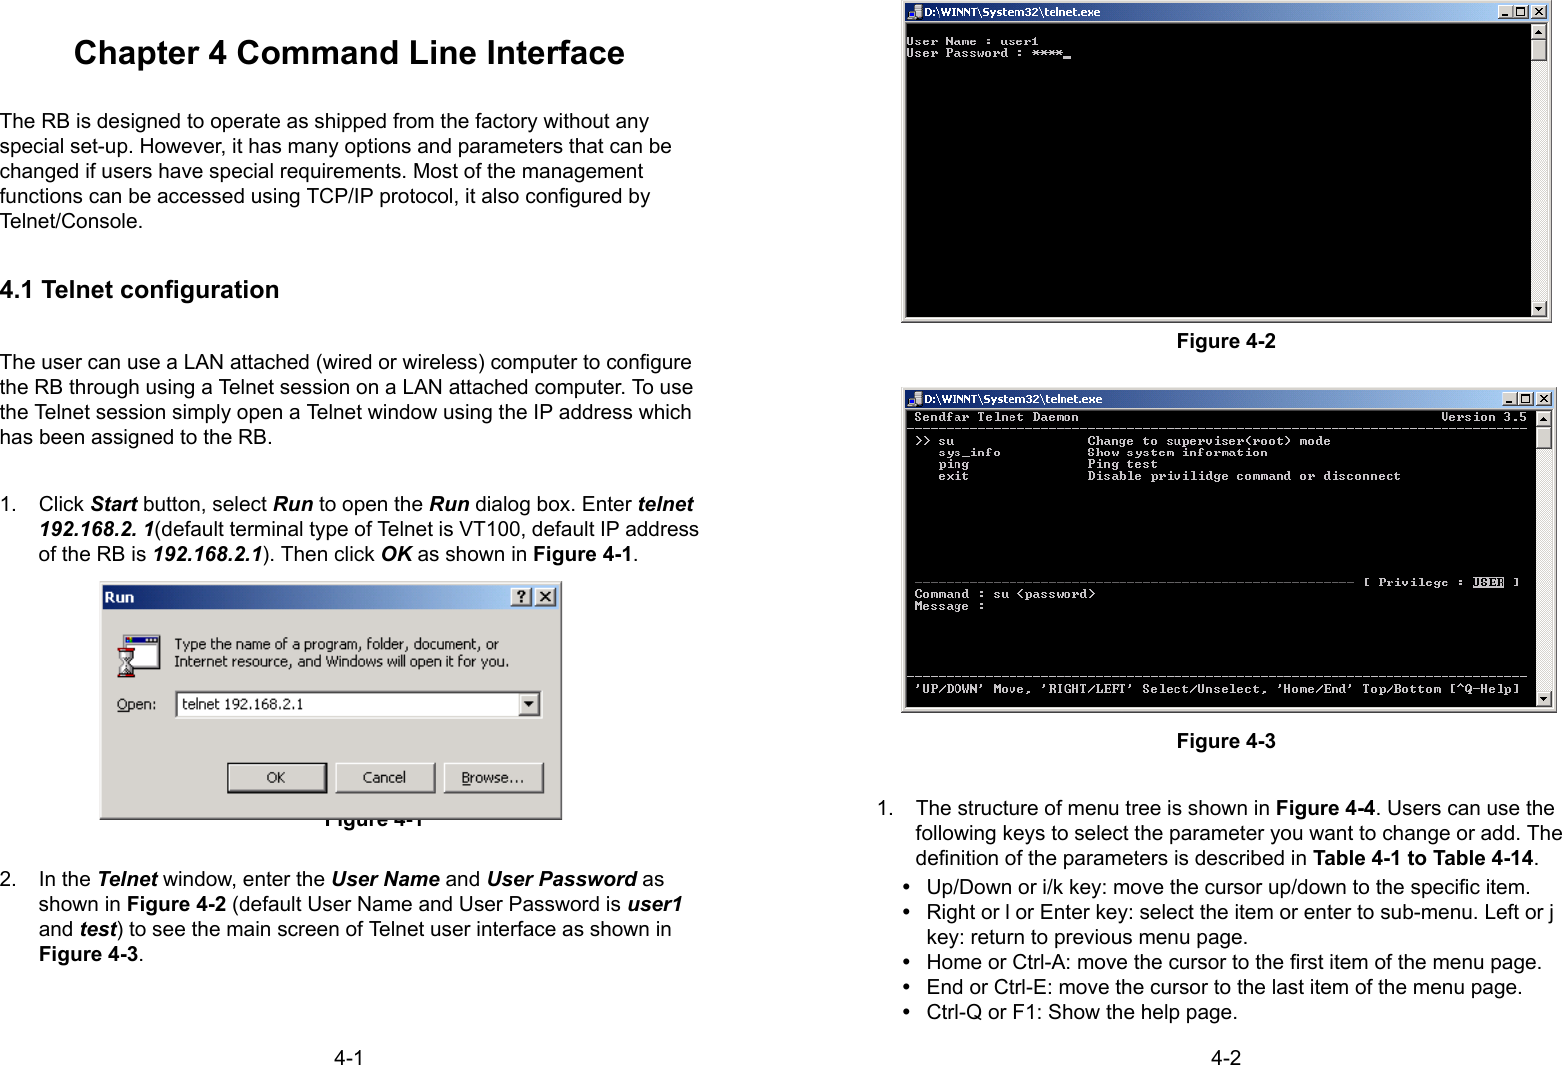 4-1Chapter 4 Command Line InterfaceThe RB is designed to operate as shipped from the factory without anyspecial set-up. However, it has many options and parameters that can bechanged if users have special requirements. Most of the managementfunctions can be accessed using TCP/IP protocol, it also configured byTelnet/Console.4.1 Telnet configurationThe user can use a LAN attached (wired or wireless) computer to configurethe RB through using a Telnet session on a LAN attached computer. To usethe Telnet session simply open a Telnet window using the IP address whichhas been assigned to the RB.1. Click Start button, select Run to open the Run dialog box. Enter telnet192.168.2. 1(default terminal type of Telnet is VT100, default IP addressof the RB is 192.168.2.1). Then click OK as shown in Figure 4-1.Figure 4-12. In the Telnet window, enter the User Name and User Password asshown in Figure 4-2 (default User Name and User Password is user1and test) to see the main screen of Telnet user interface as shown inFigure 4-3.4-2Figure 4-2Figure 4-31.  The structure of menu tree is shown in Figure 4-4. Users can use thefollowing keys to select the parameter you want to change or add. Thedefinition of the parameters is described in Table 4-1 to Table 4-14.y  Up/Down or i/k key: move the cursor up/down to the specific item.y  Right or l or Enter key: select the item or enter to sub-menu. Left or jkey: return to previous menu page.y  Home or Ctrl-A: move the cursor to the first item of the menu page.y  End or Ctrl-E: move the cursor to the last item of the menu page.y  Ctrl-Q or F1: Show the help page.